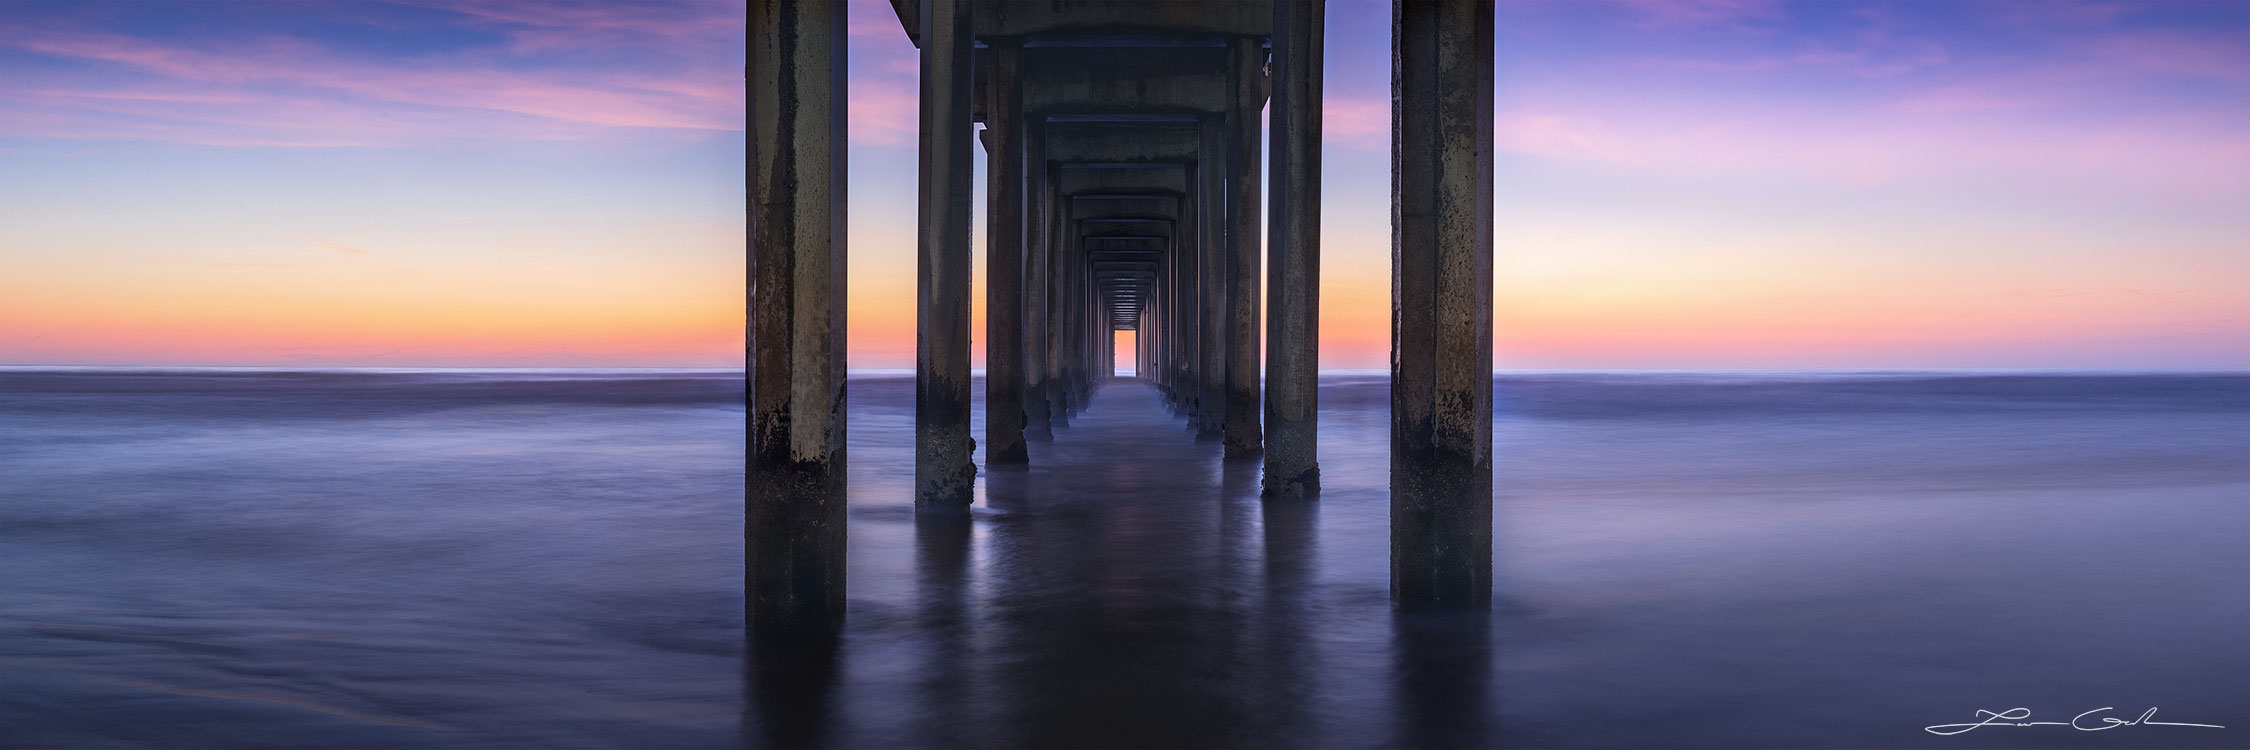 A twilight pier with beautiful sunset light and slow motion ocean water in California - Gintchin Fine Art